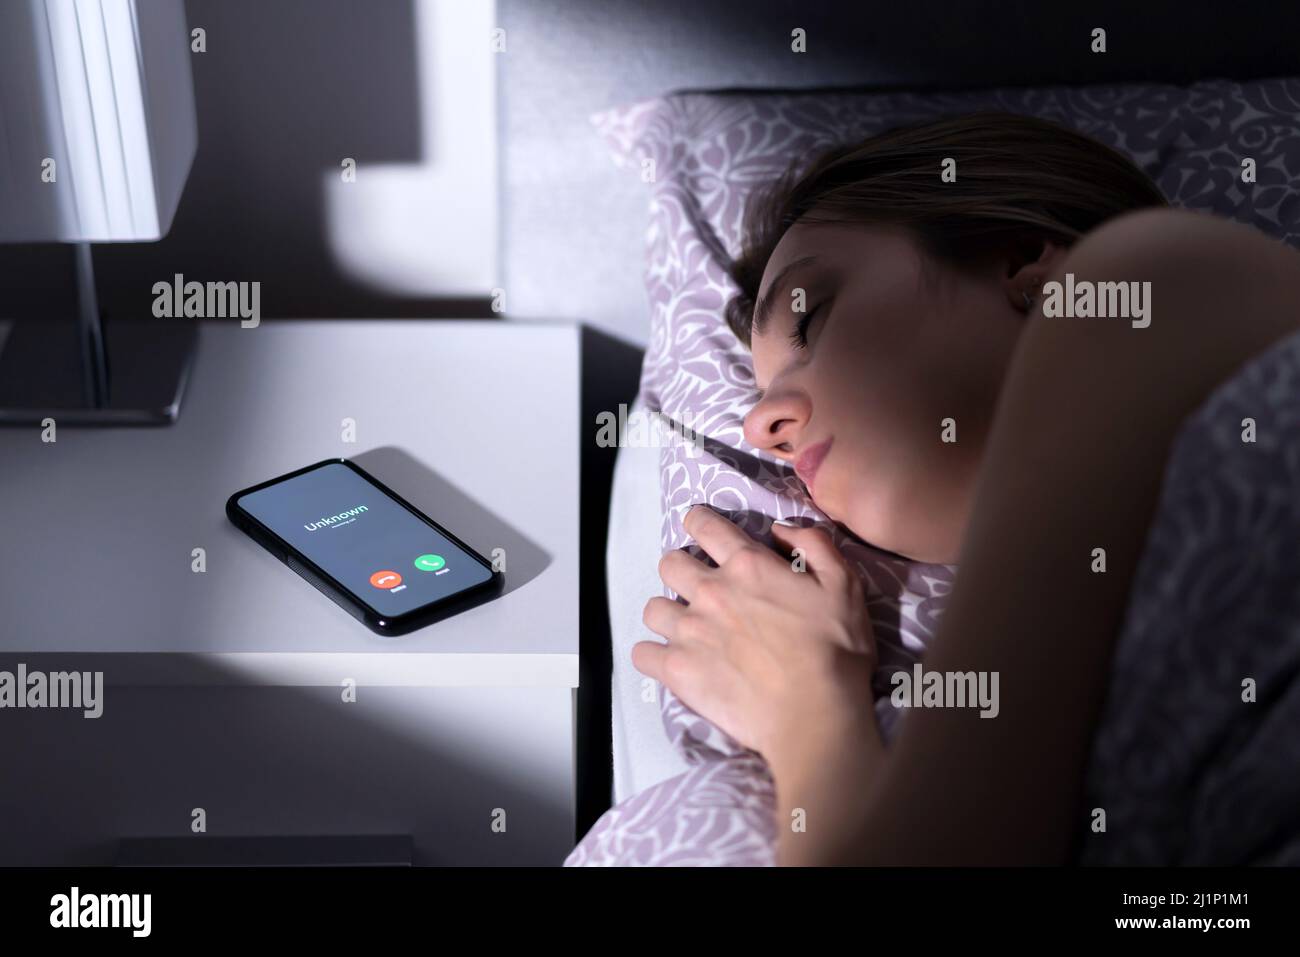 Phone call by unknown caller at night while woman is sleeping in bed. Scam, fraud or mobile hoax from suspicious fake number. Illegal mobile crime. Stock Photo